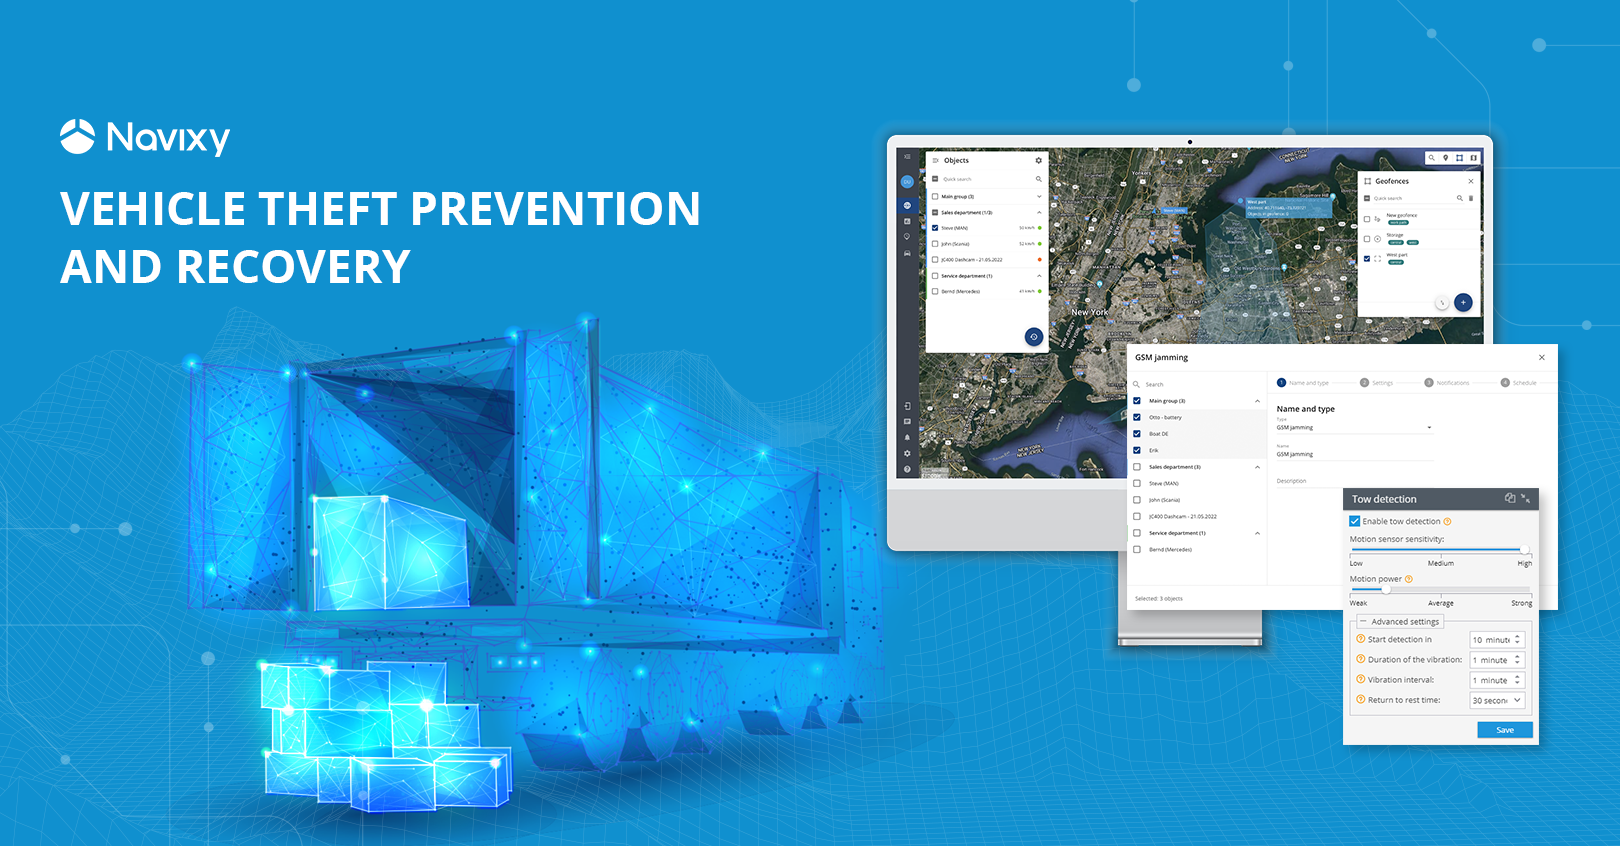 Navixy fleet security: prevent theft and recover vehicles